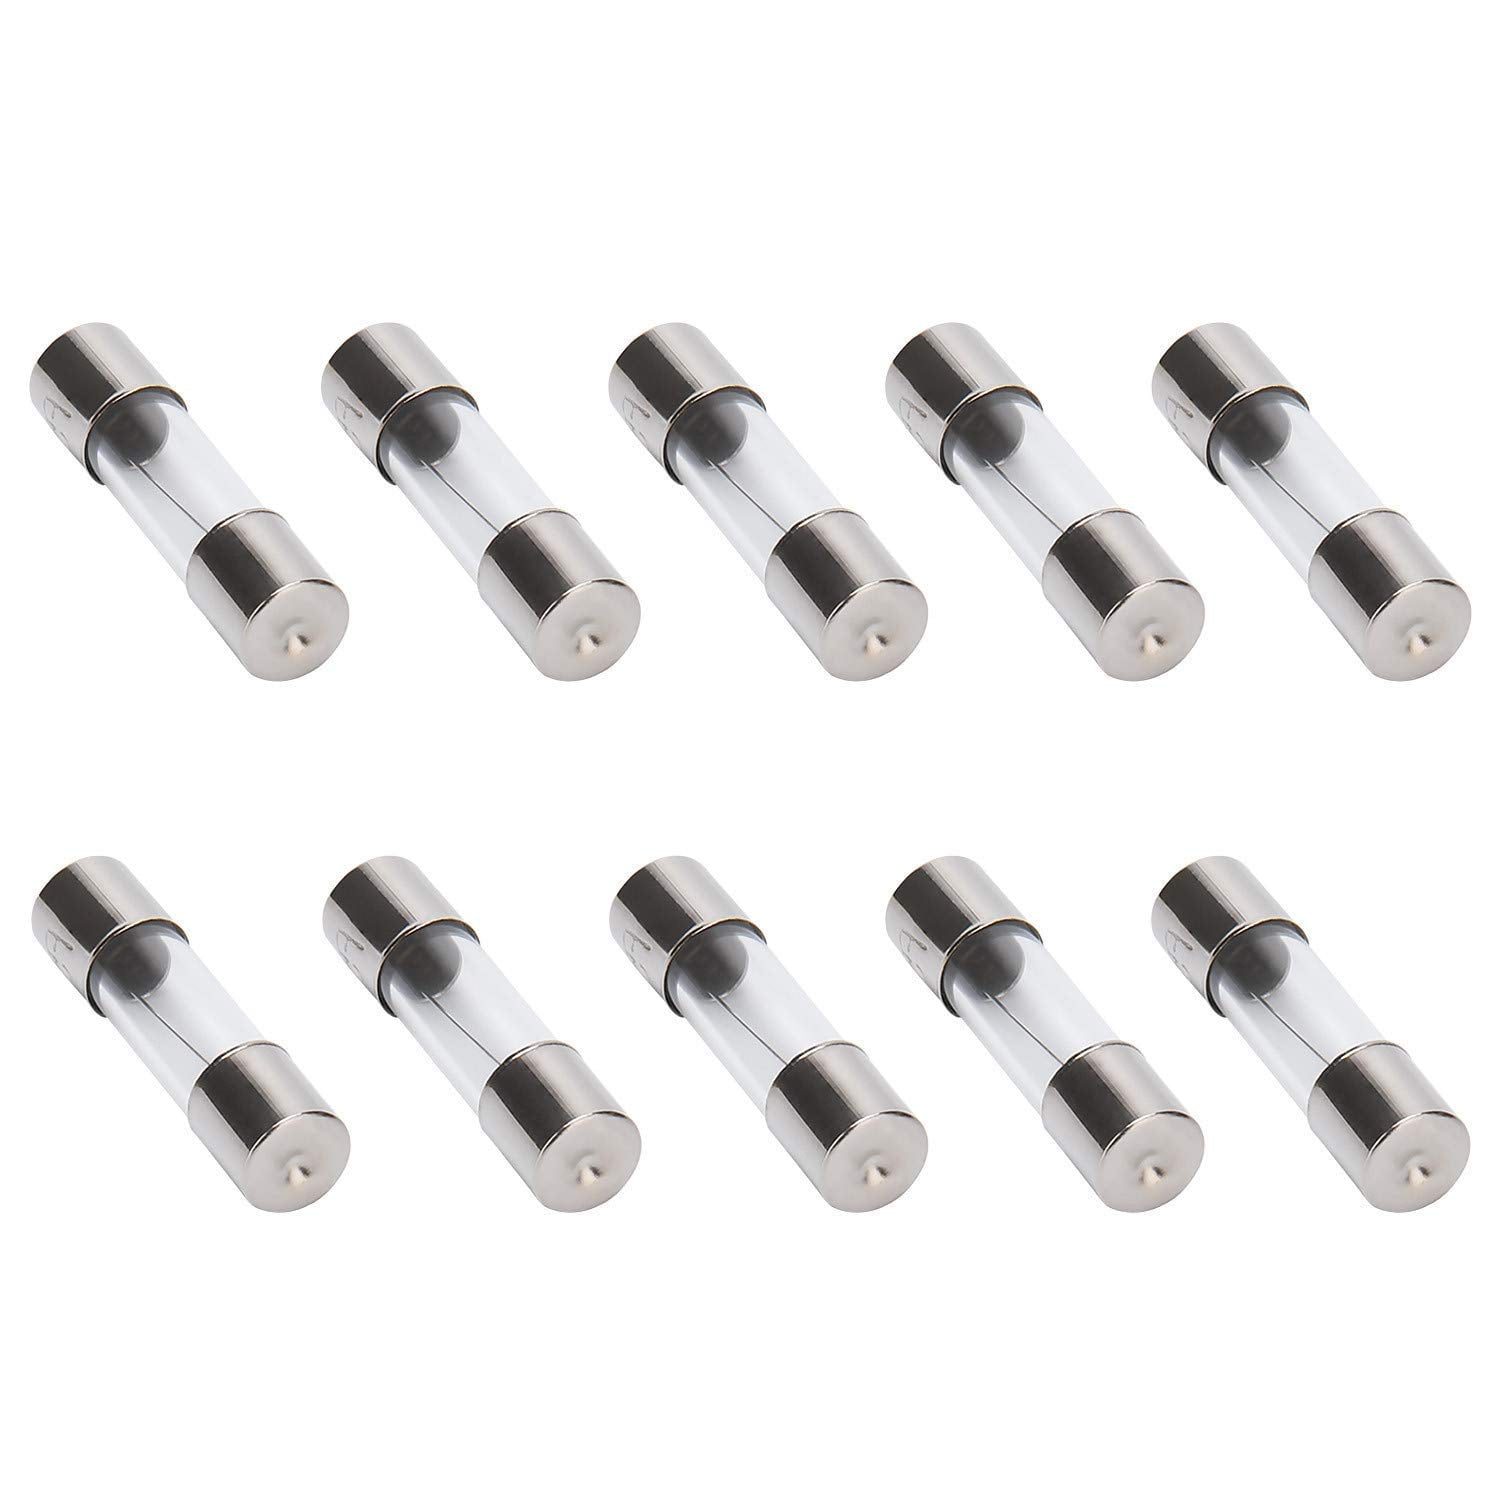 5A 20MM QUICK BLOW FUSE PACK 10 